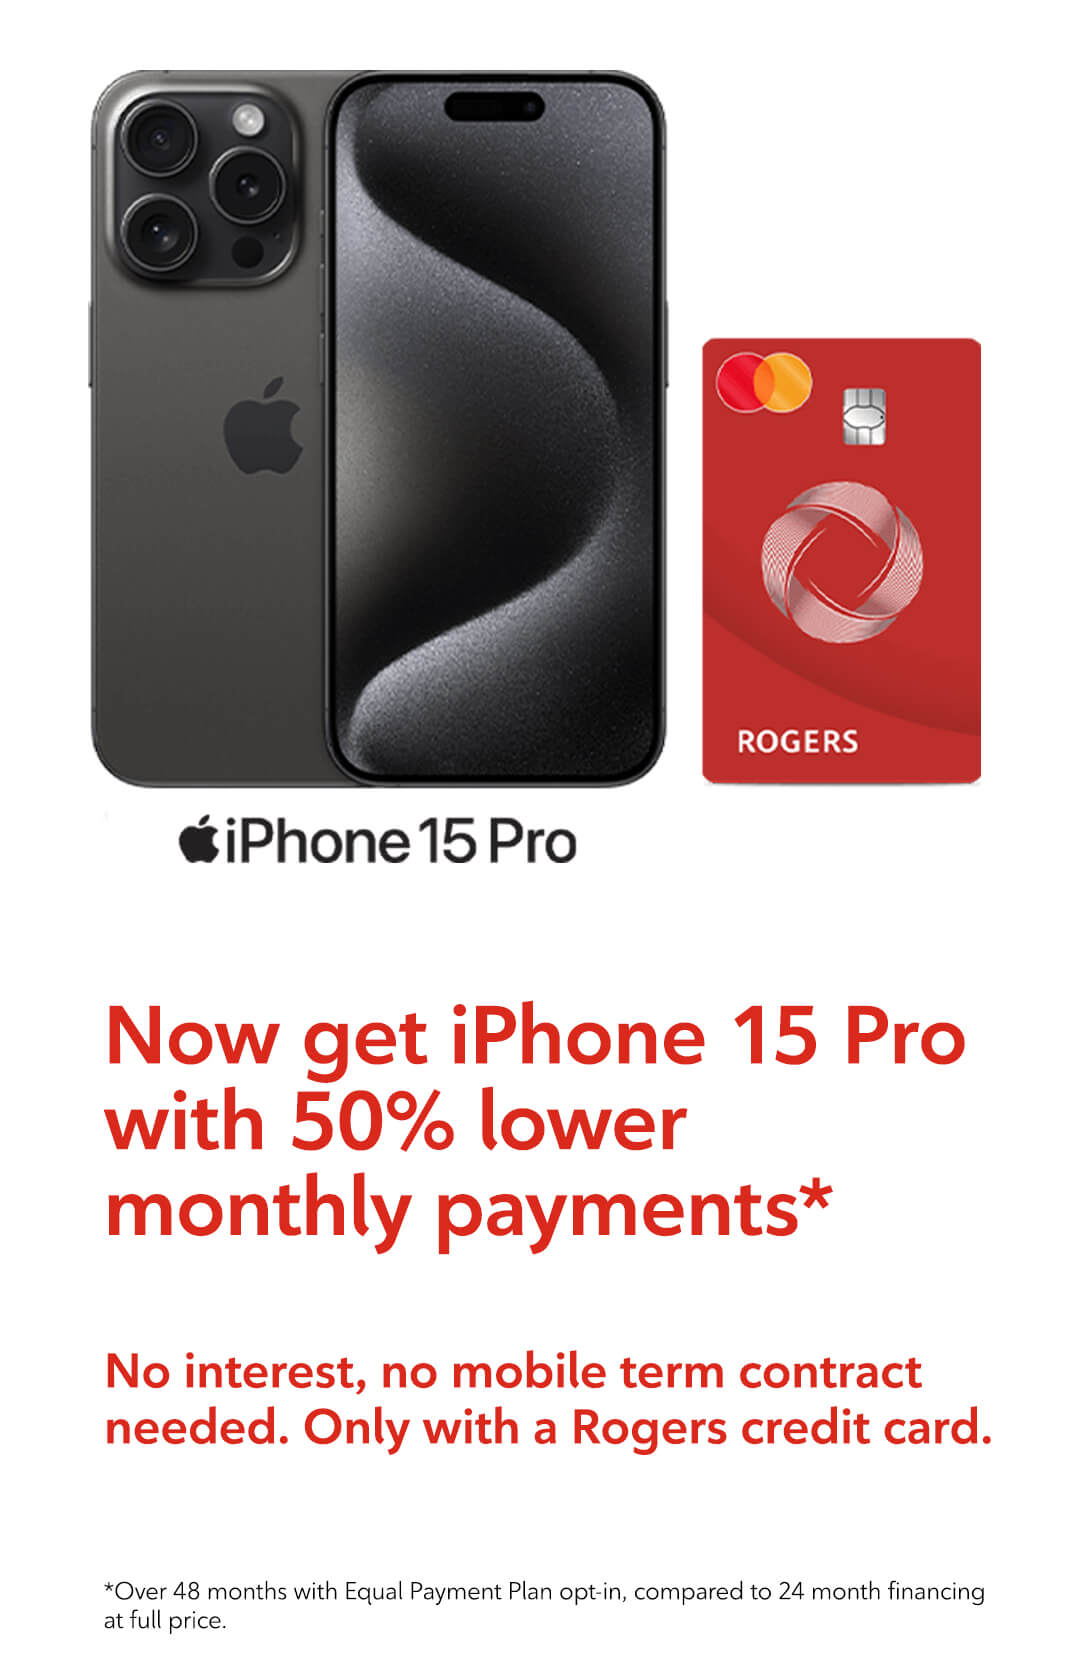 iPhone 15 Pro with Rogers credit card